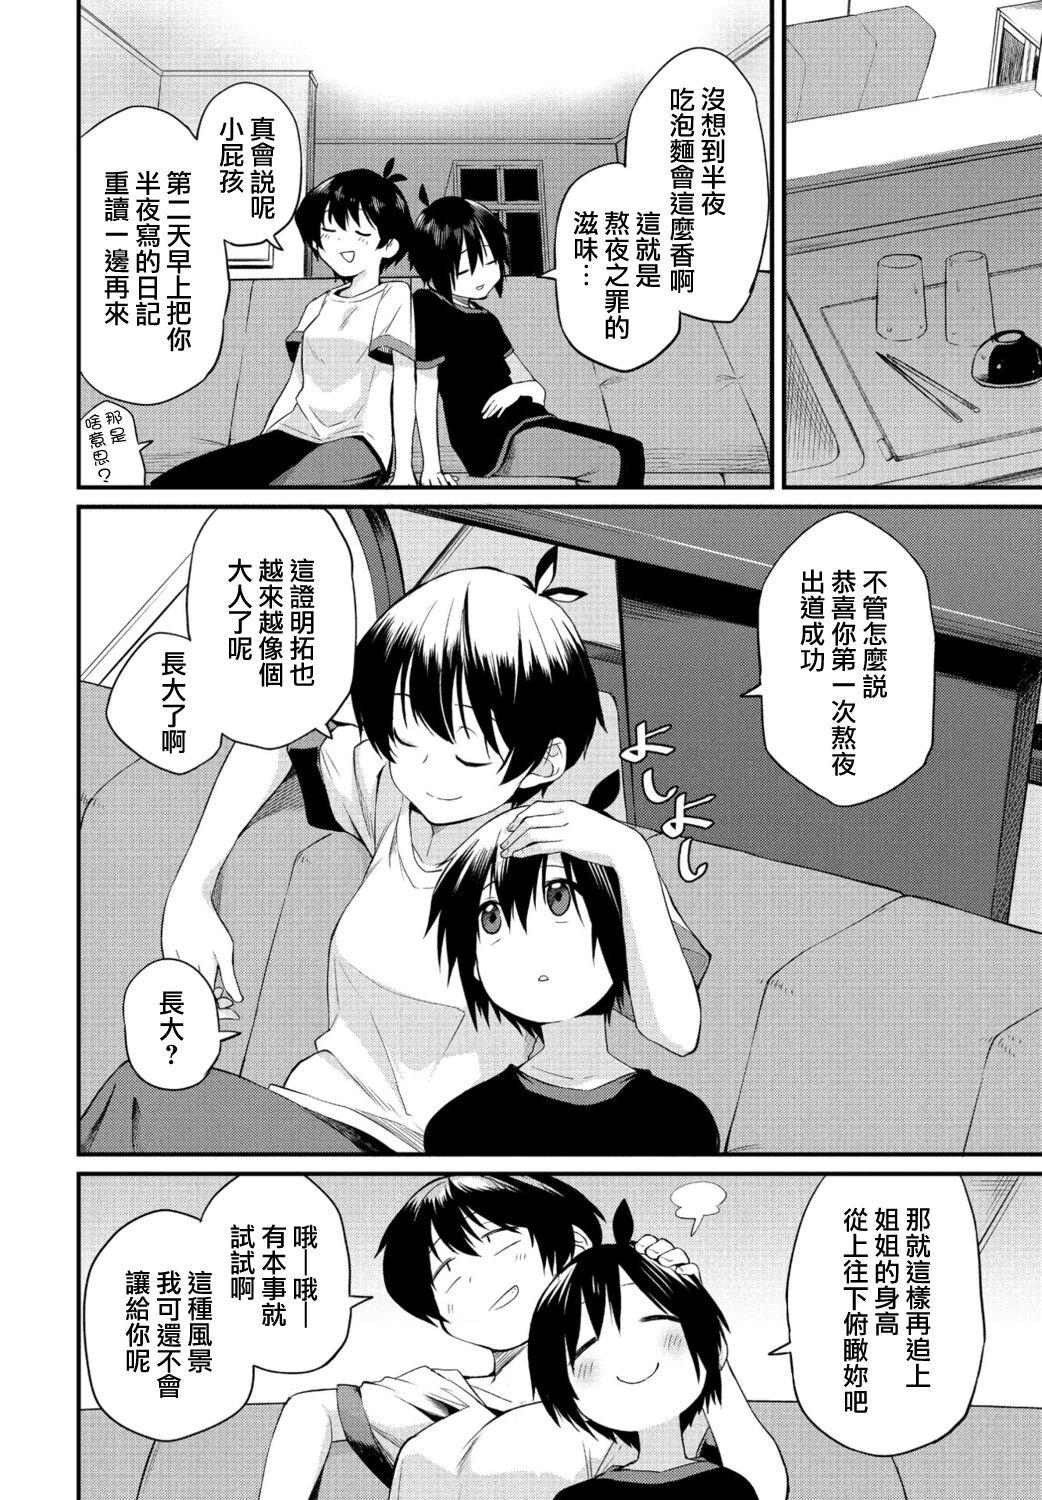 Spooning Kimagure Onee-chan 2 Staxxx - Page 4